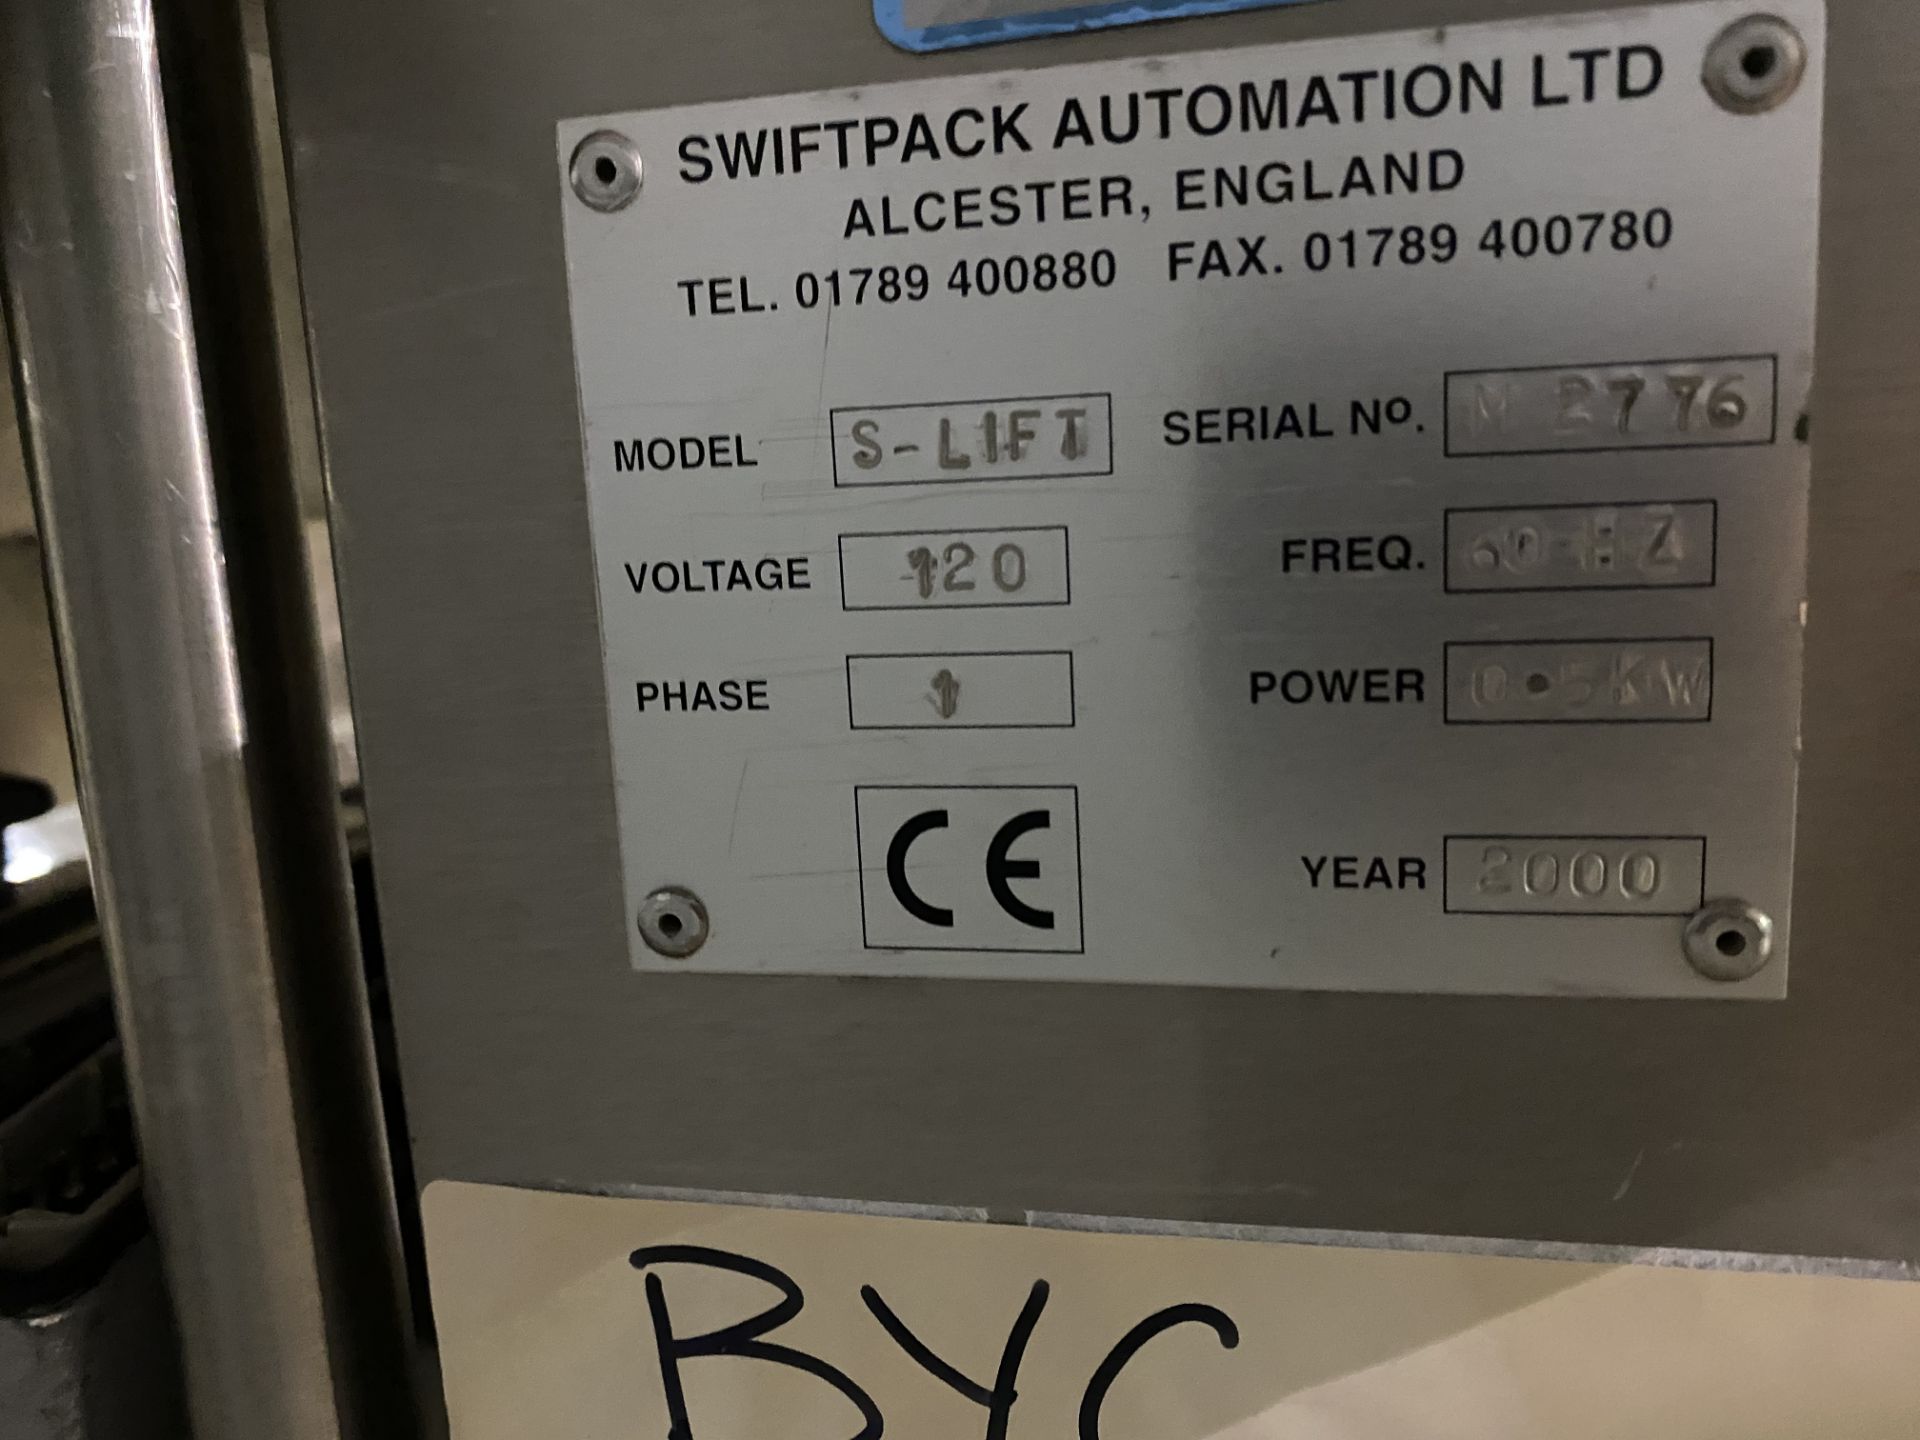 DT Industries Kalish 8005 sn 802010 (Swiftpack Automation Model S12P3PTS sn M2777/8), 120V,1ph, 60Hz - Image 11 of 23